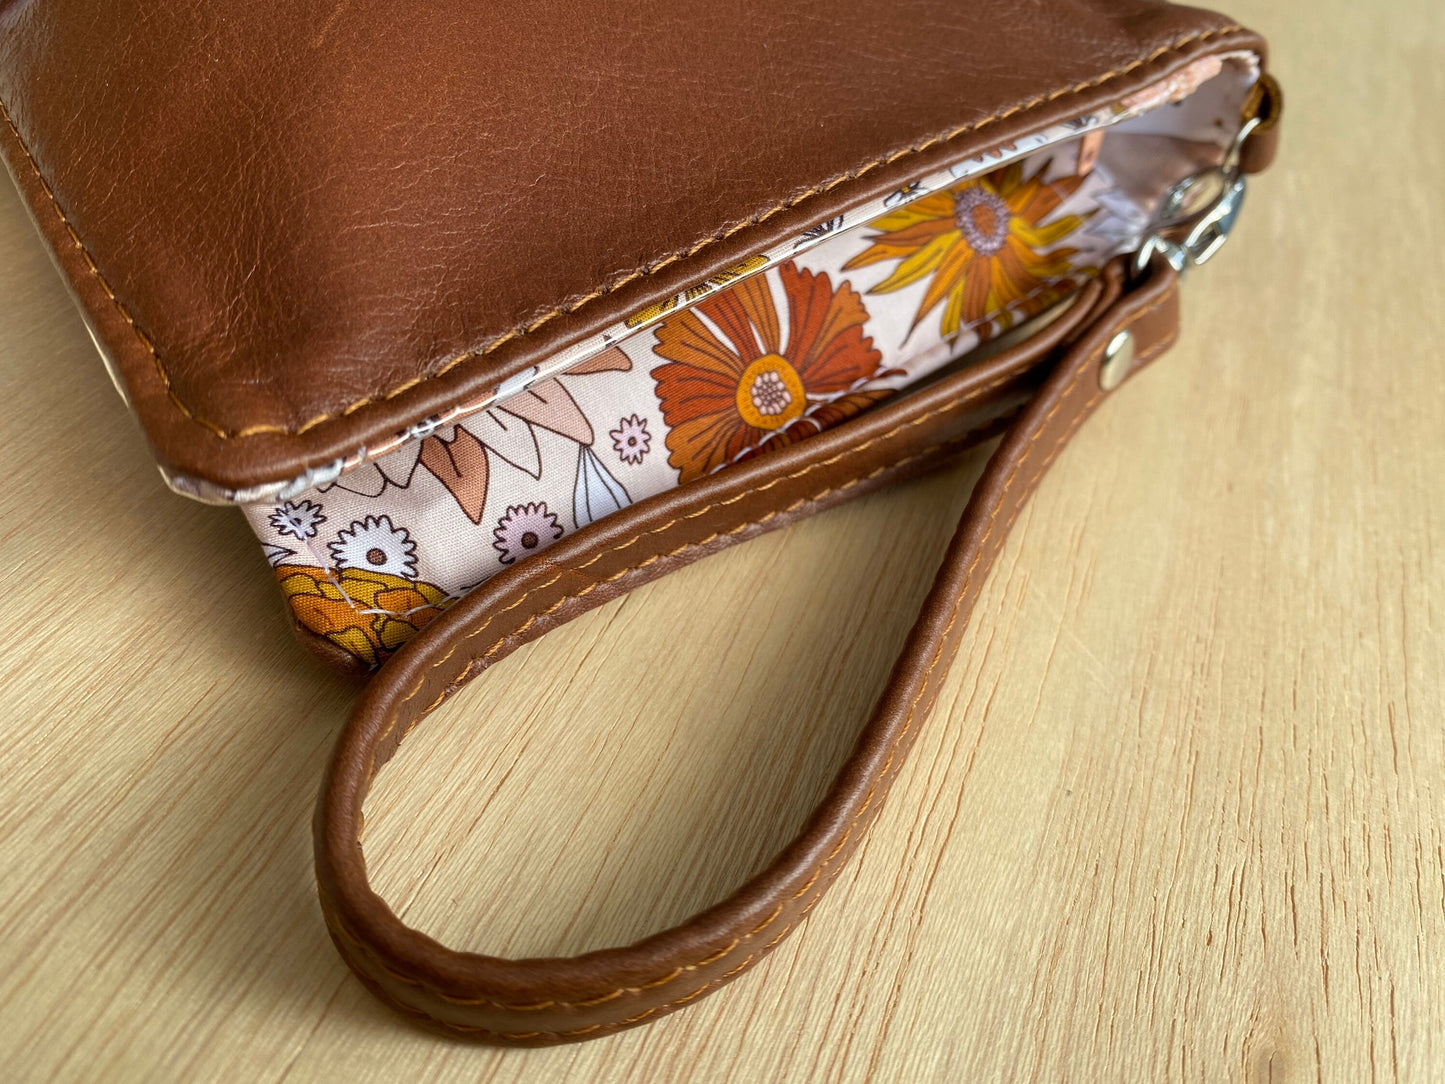 Leather Nappy Wallet - Flowers on tan leather